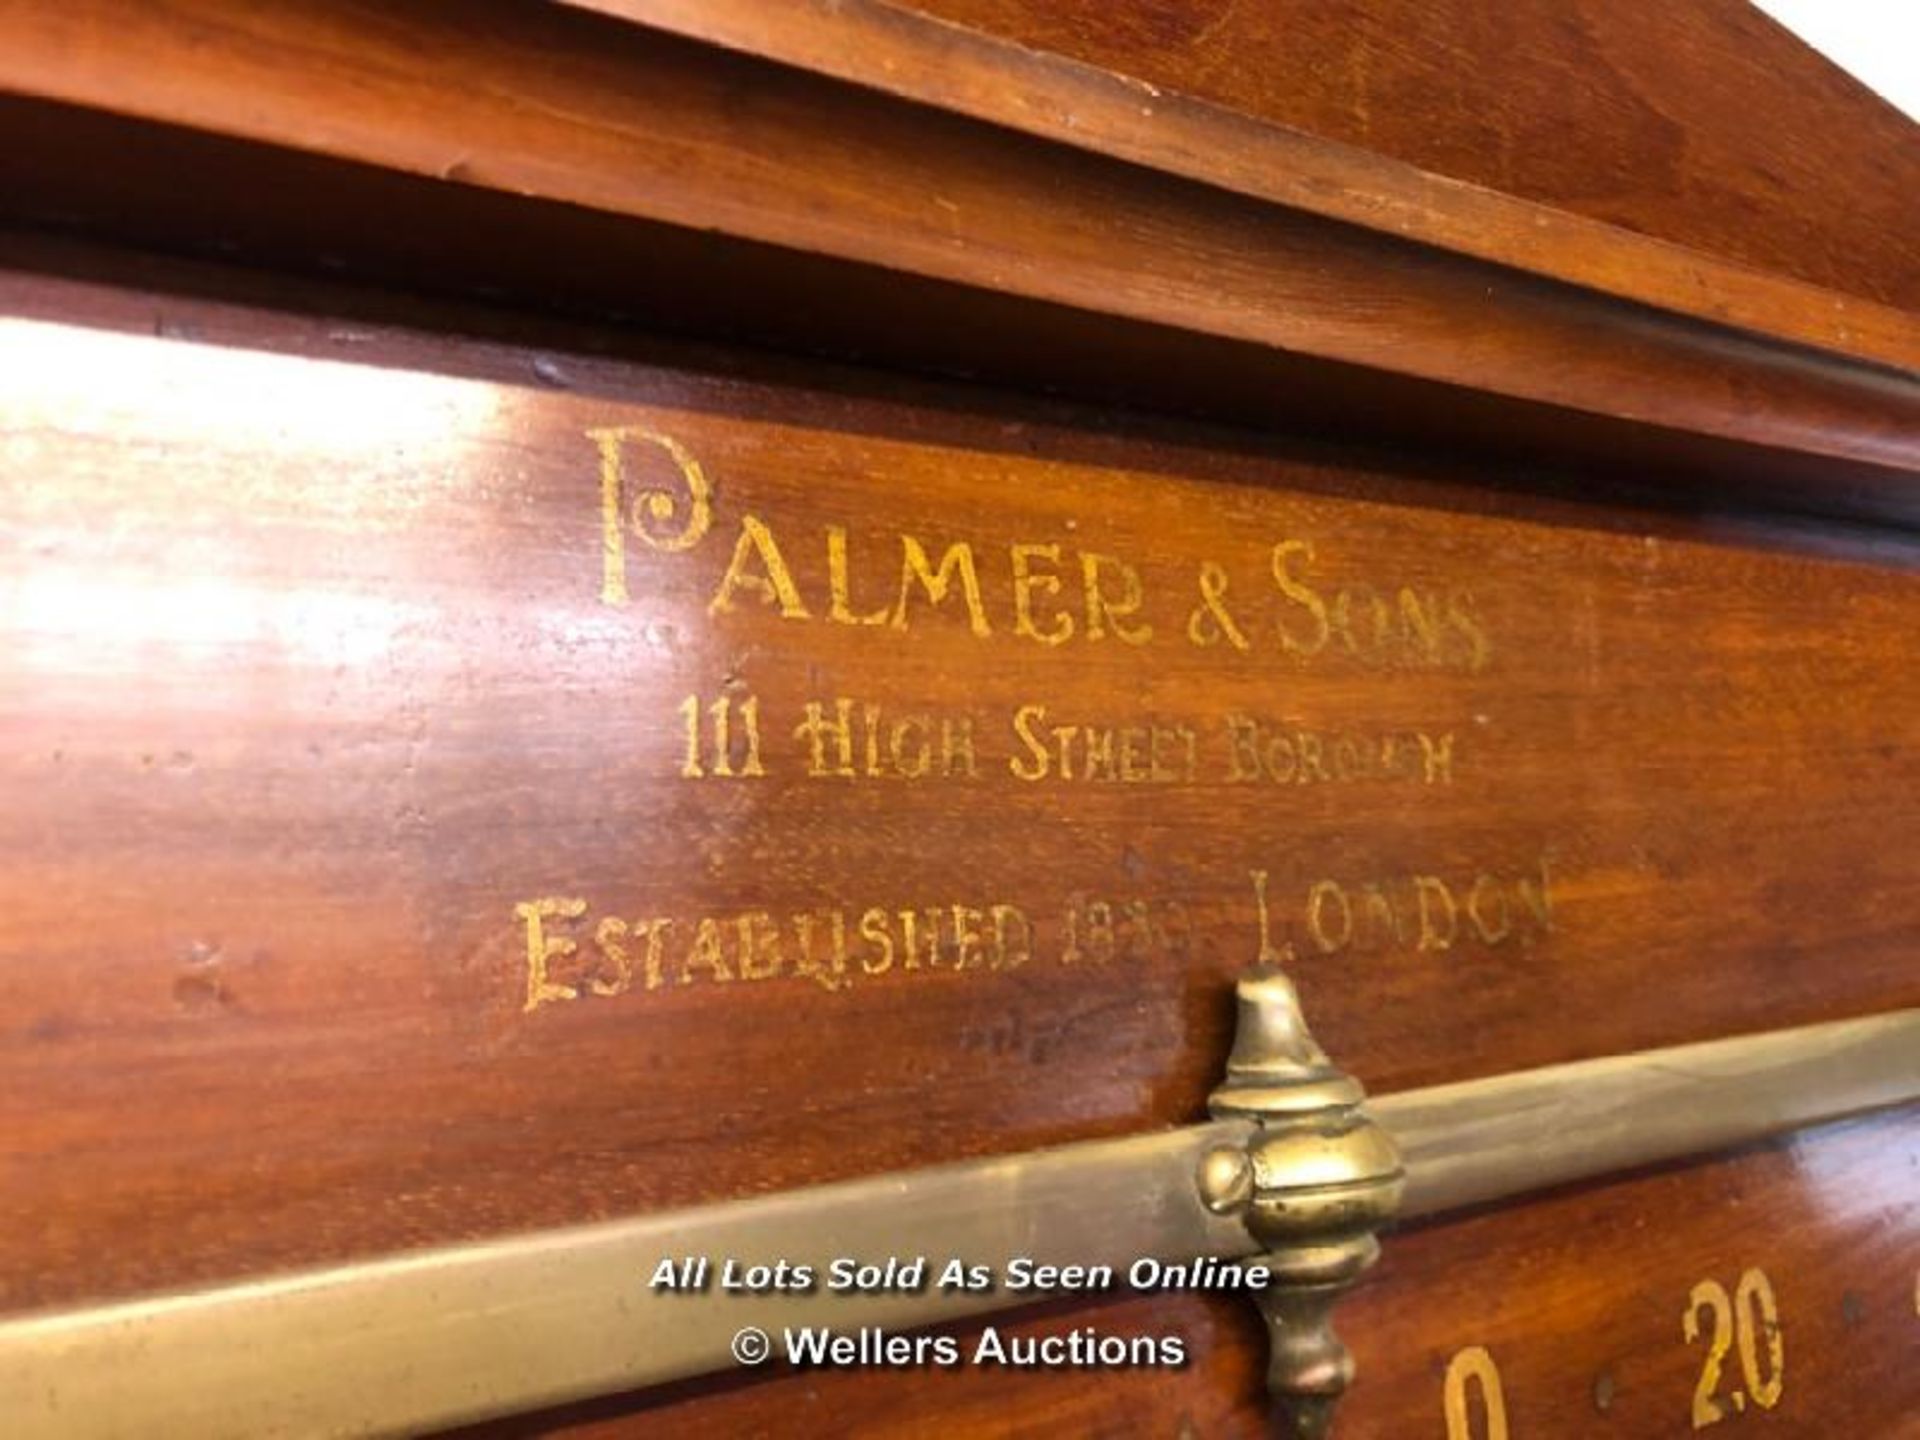 PALMER & SONS OF LONDON SCOREBOARD SLIDER WITH RAISED PEDIMENT, GOLD LEAF LETTERING WITH POINTERS ON - Image 3 of 3